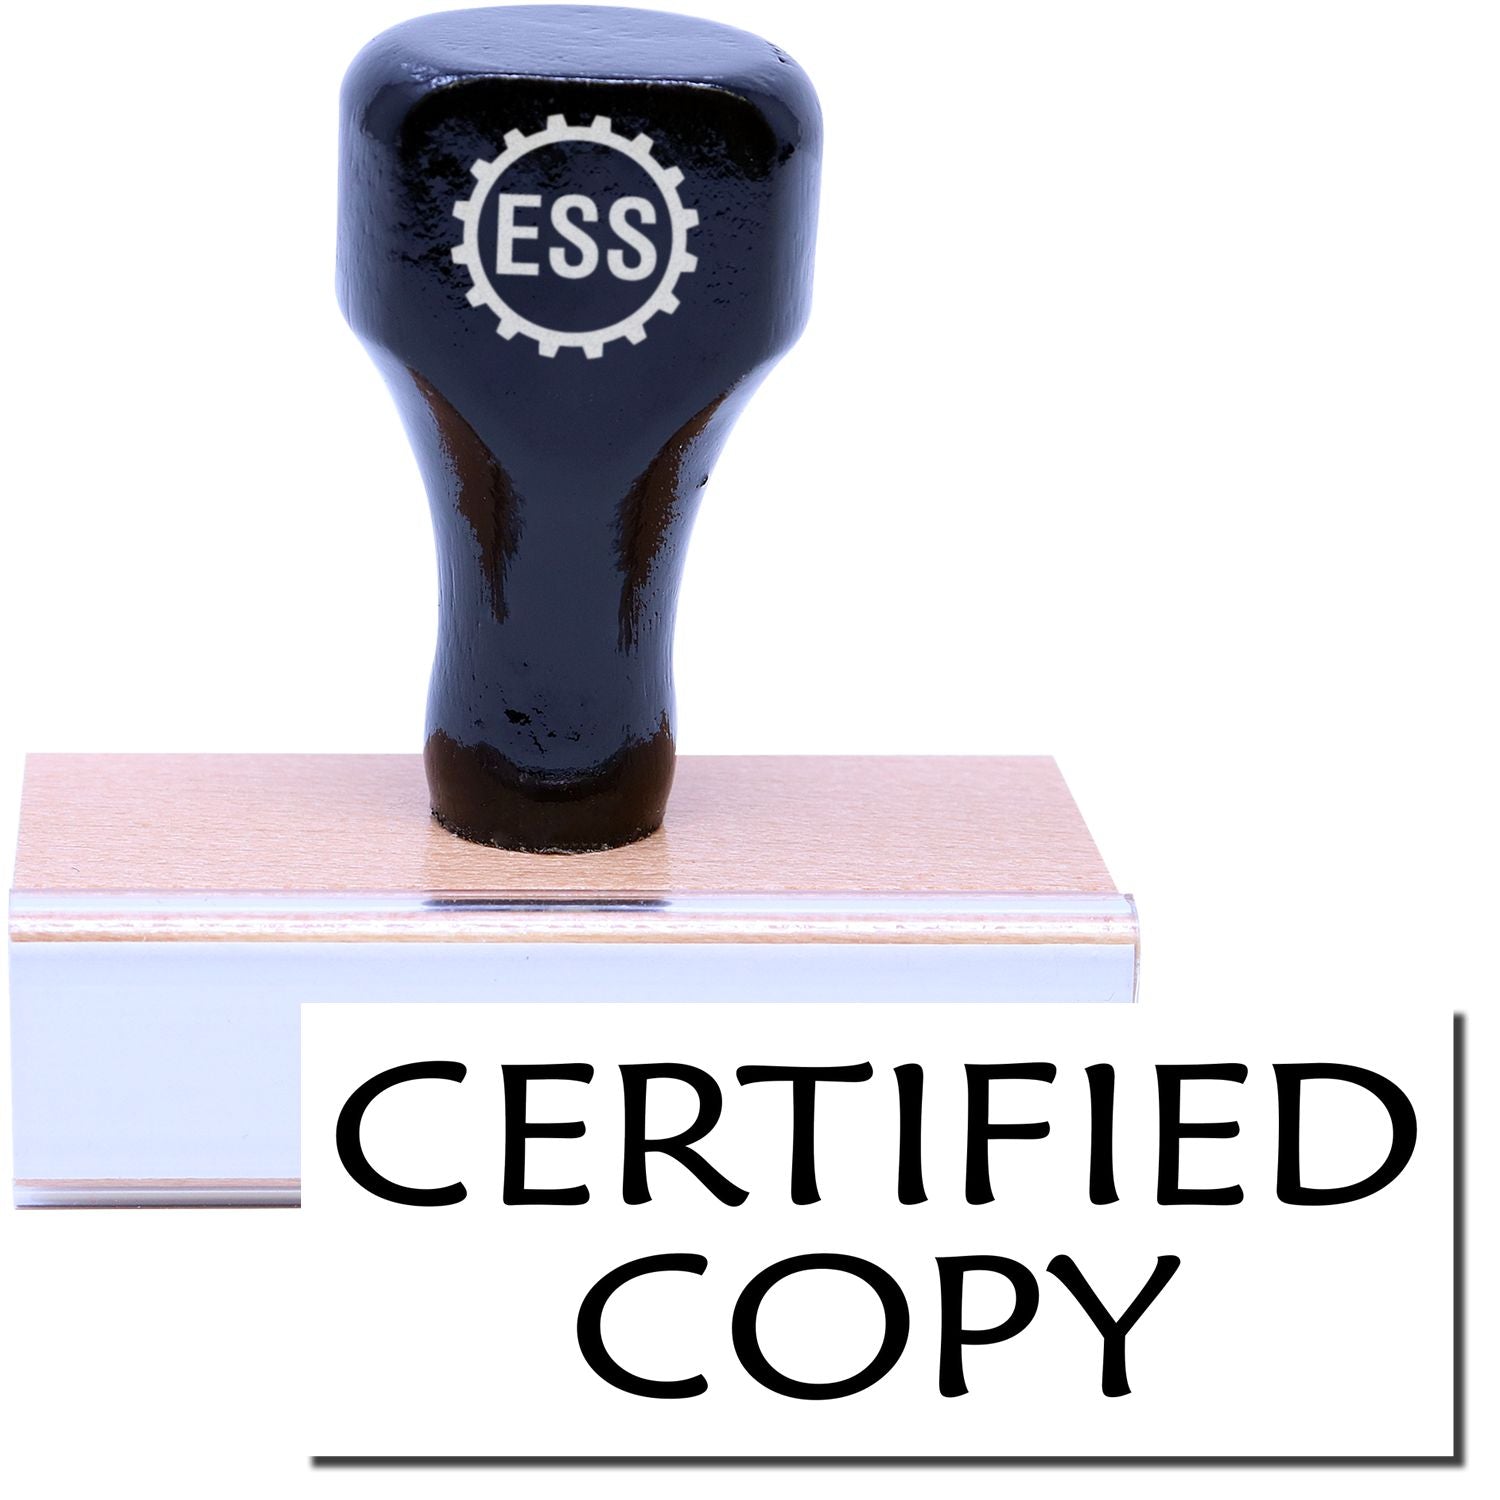 A stock office rubber stamp with a stamped image showing how the text "CERTIFIED COPY" is displayed after stamping.